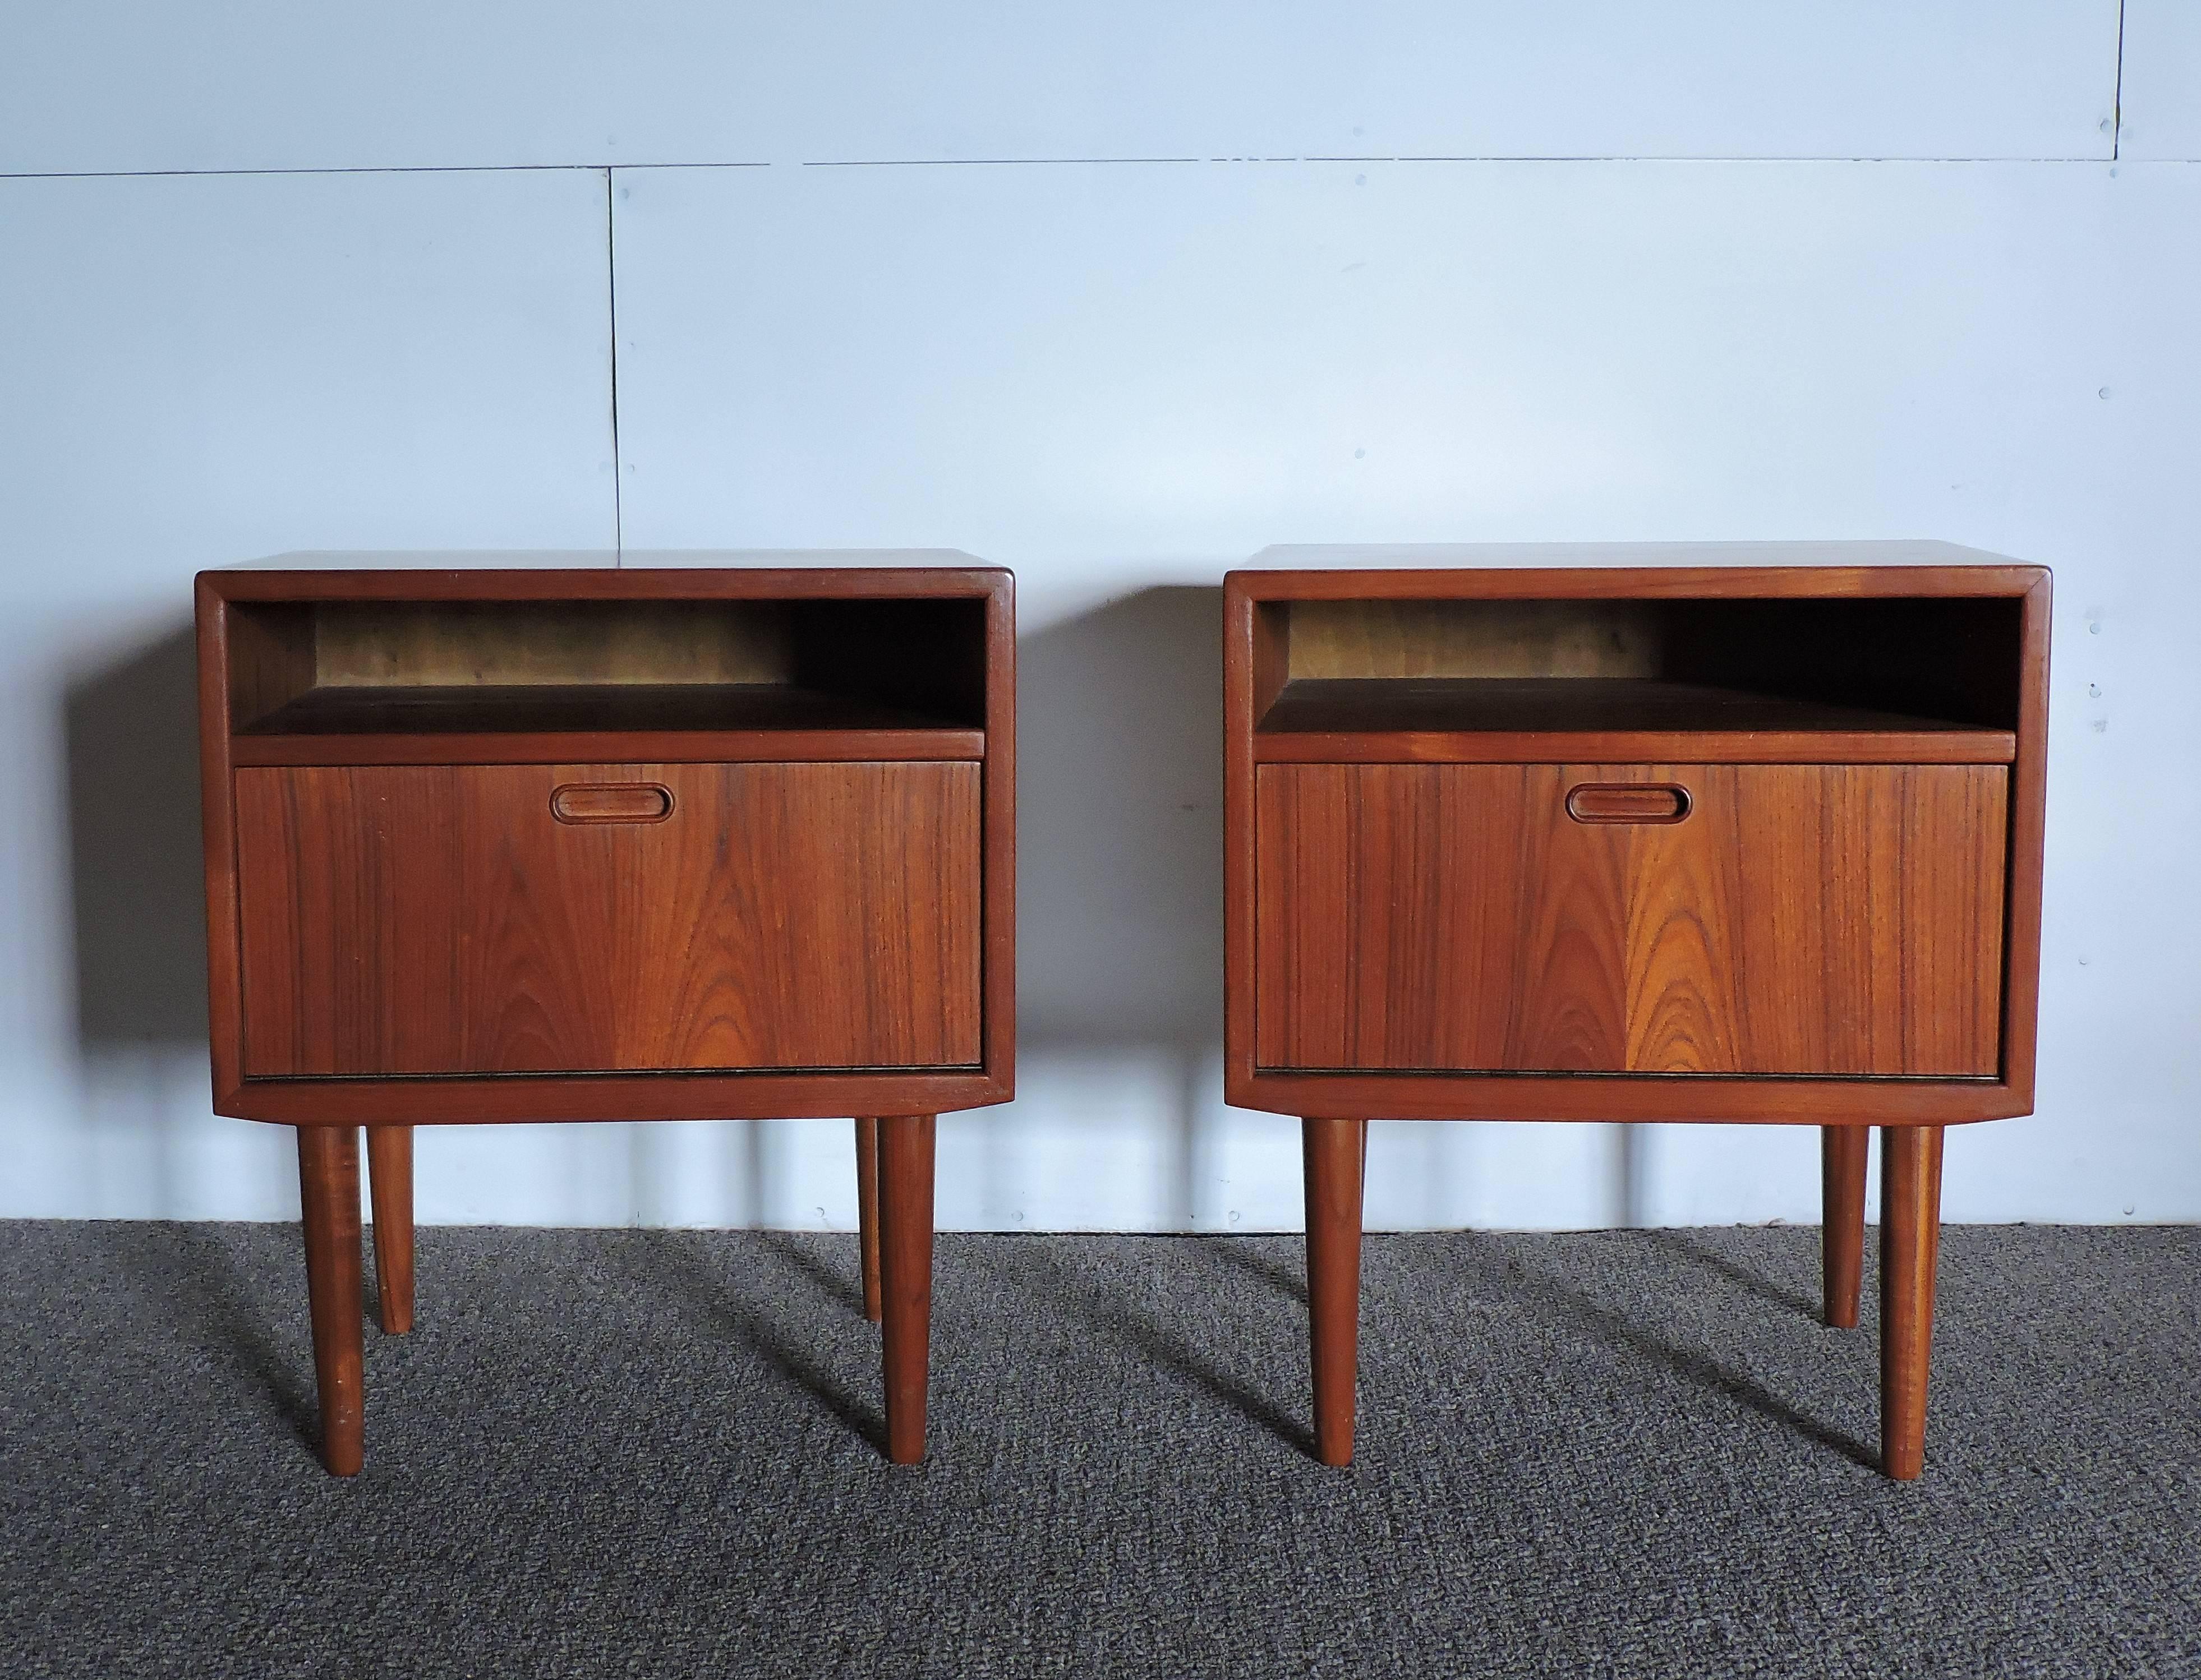 Wonderful pair of teak nightstands made in Denmark by Falster. These stands have an open shelf area, a drop-down door with a piano hinge, inset teak pulls, and tapered legs.